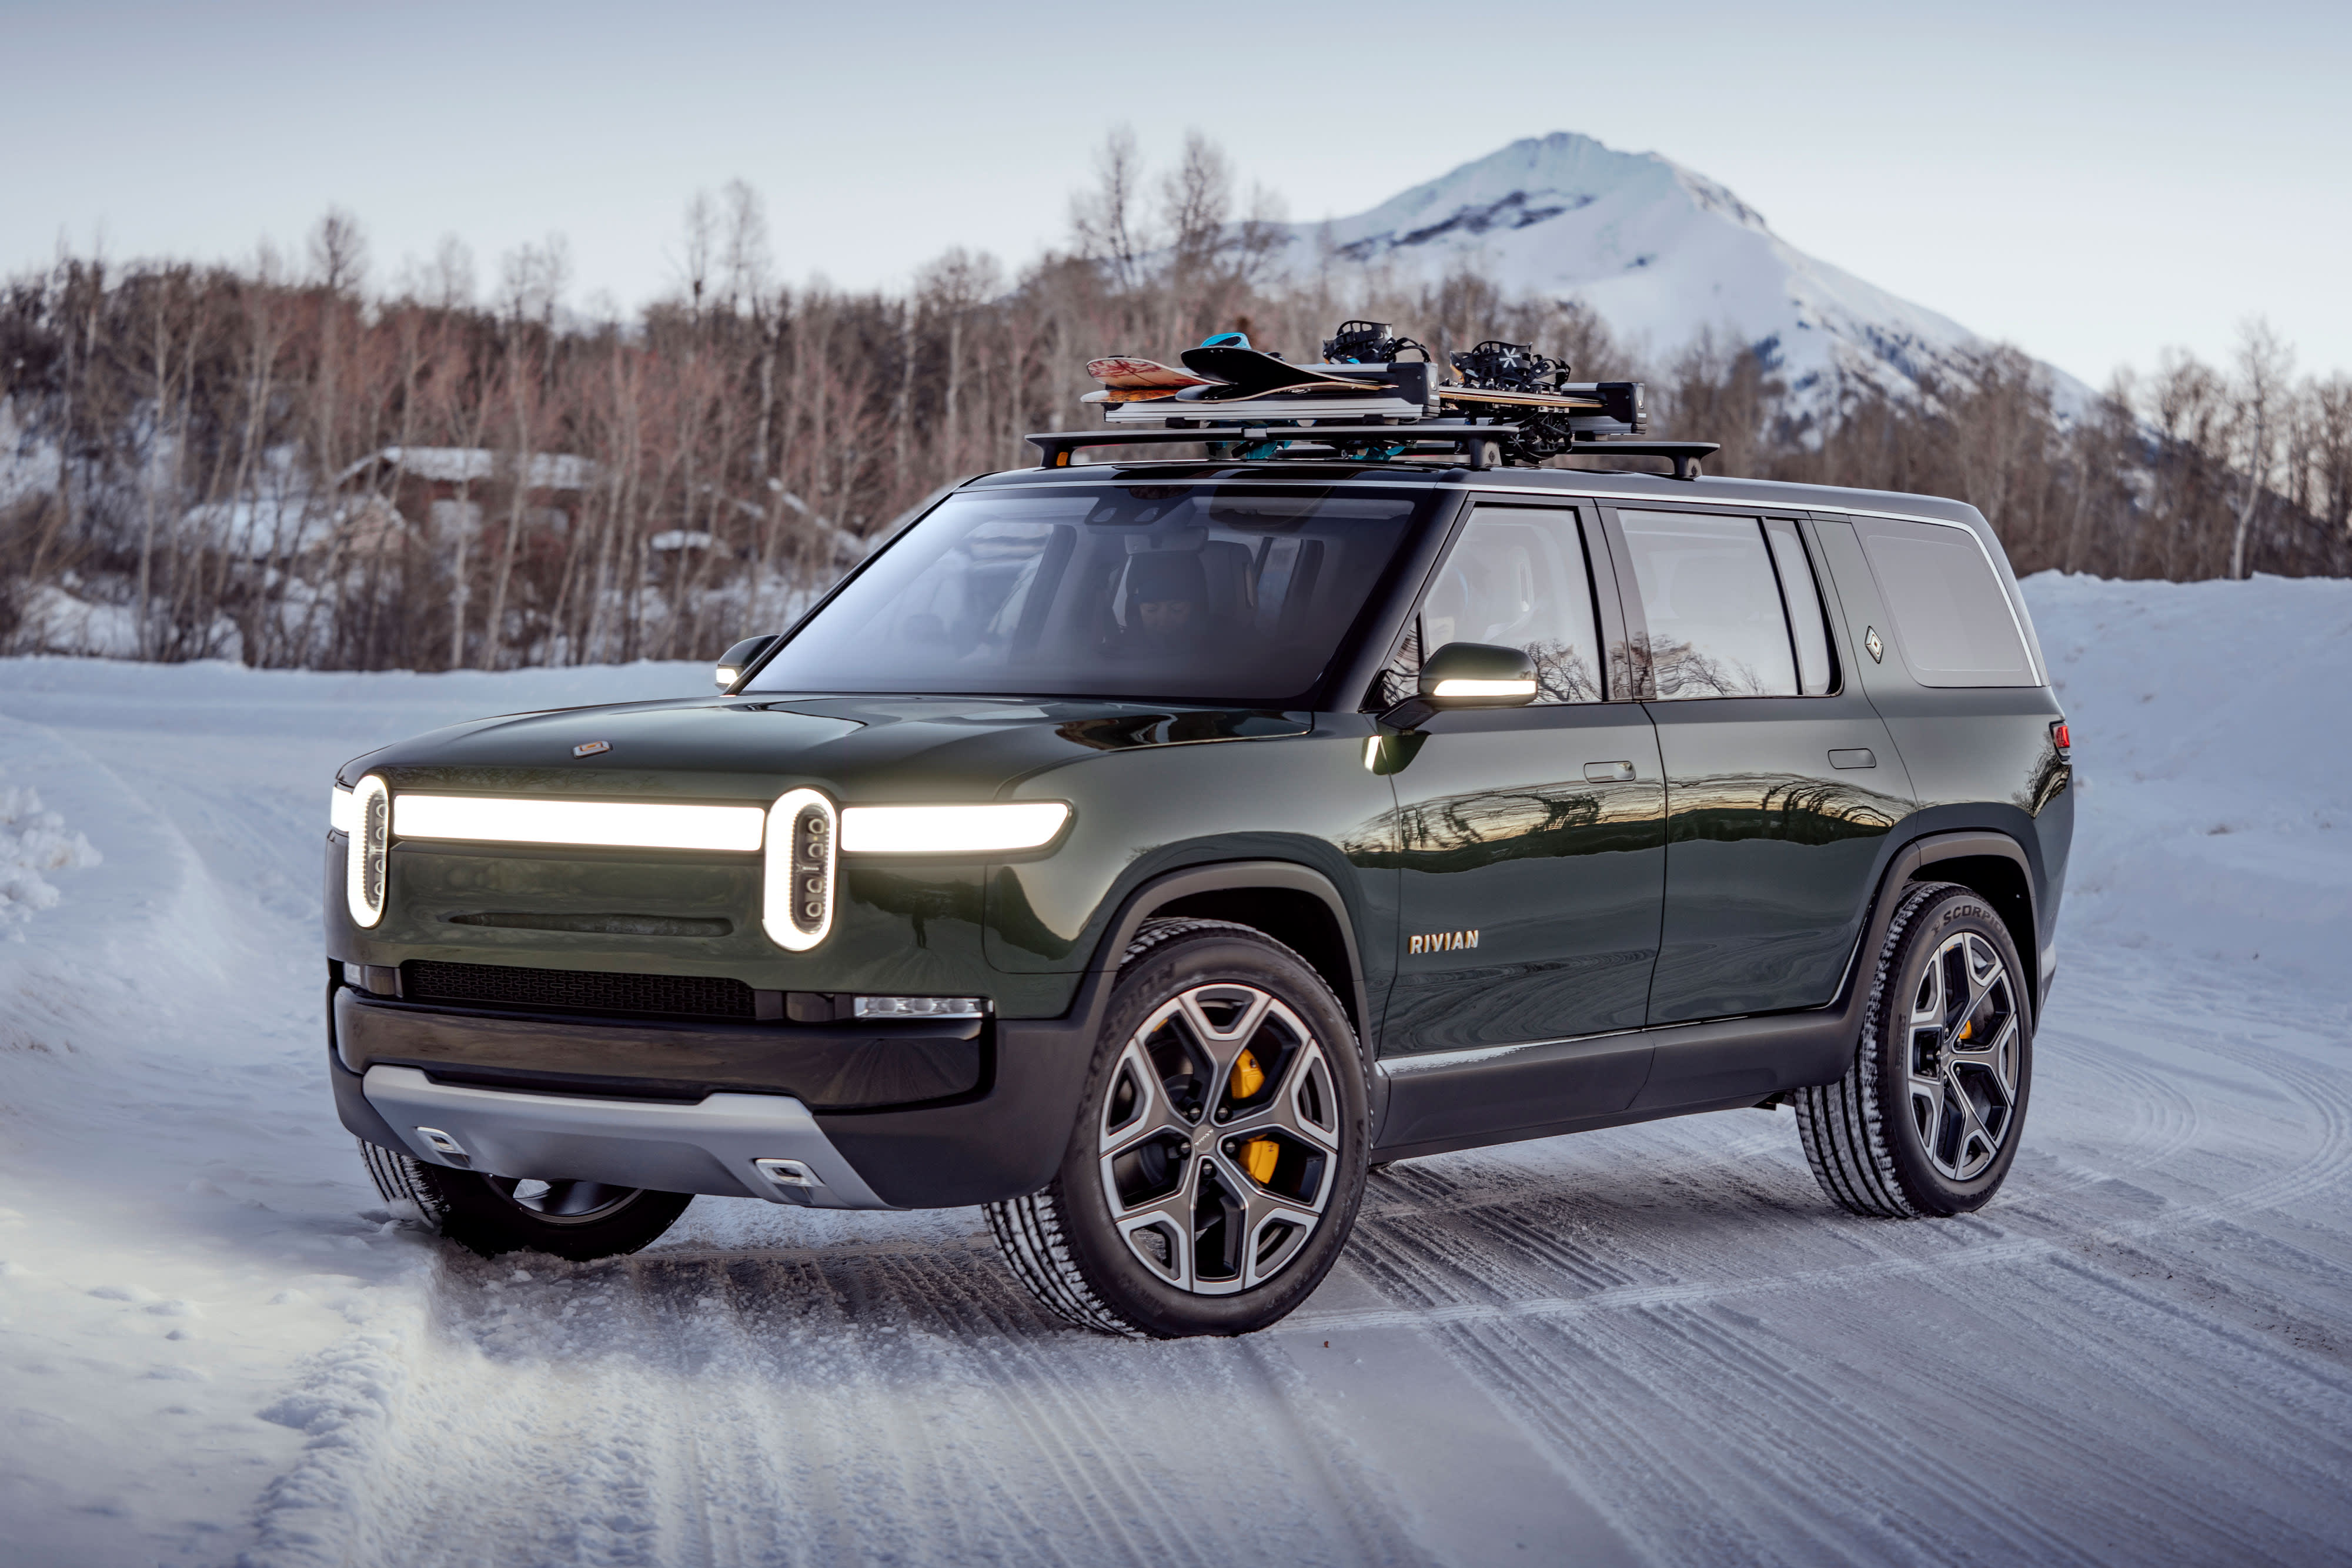 Rivian, EV company, raises $ 2.65 billion in new round of financing led by T. Rowe Price